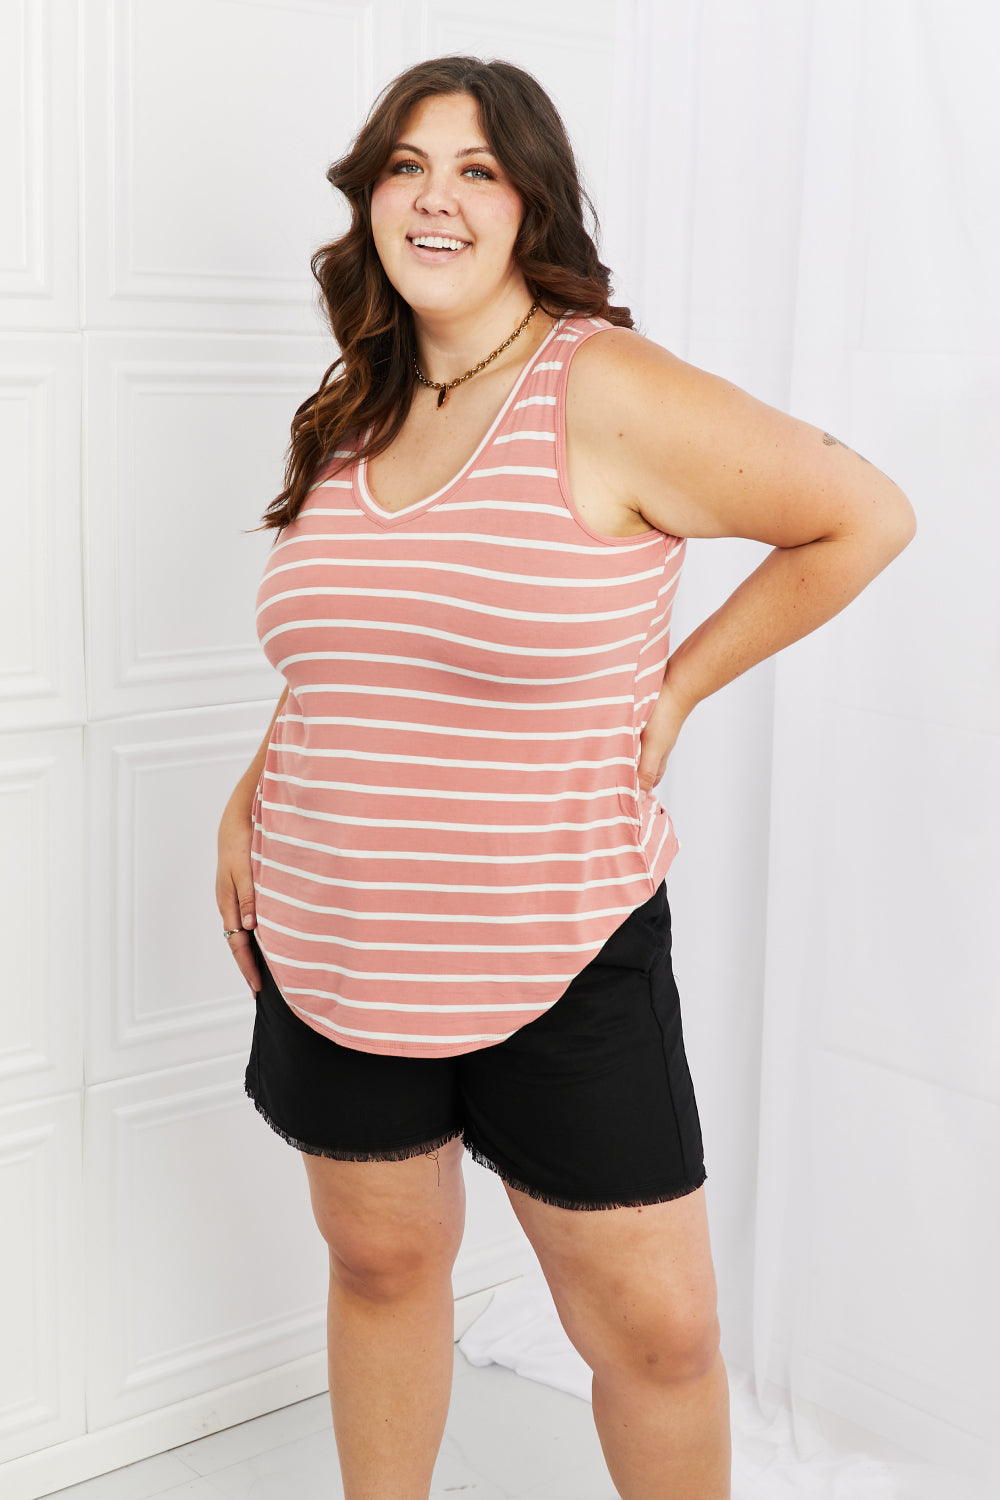 Find Your Path Full Size Sleeveless Striped Top - Women’s Clothing & Accessories - Shirts & Tops - 3 - 2024